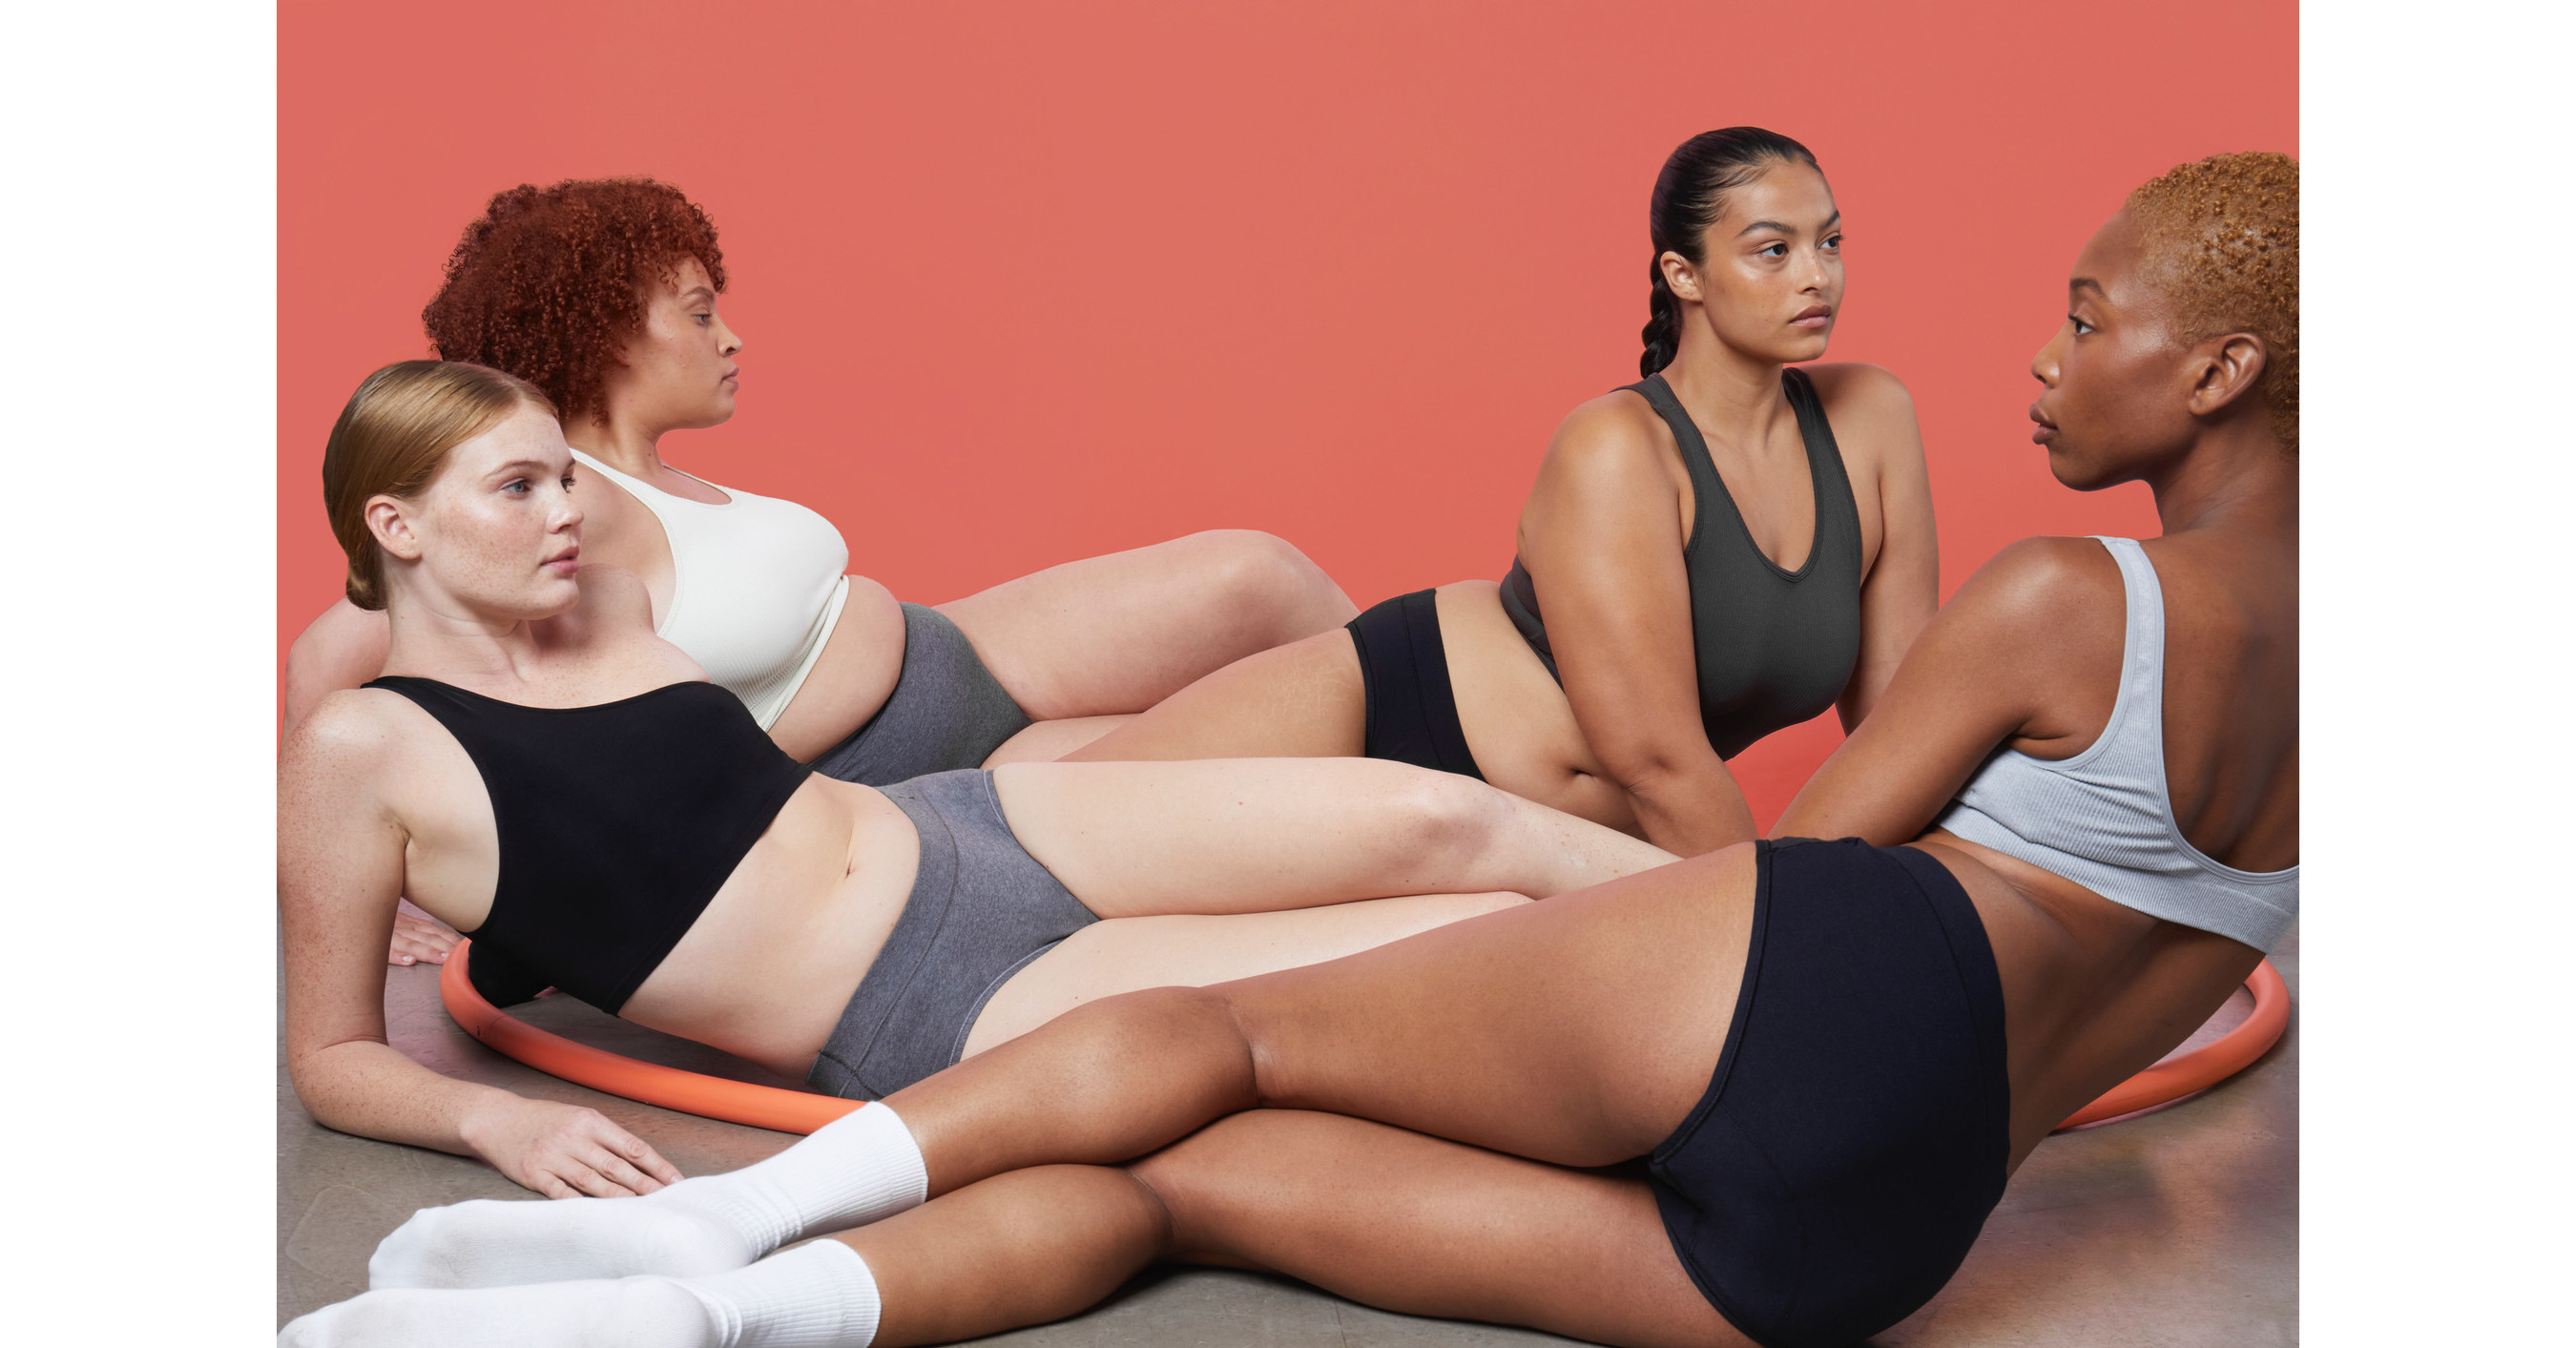 Thinx Announces Nationwide Expansion of Thinx for All™ into